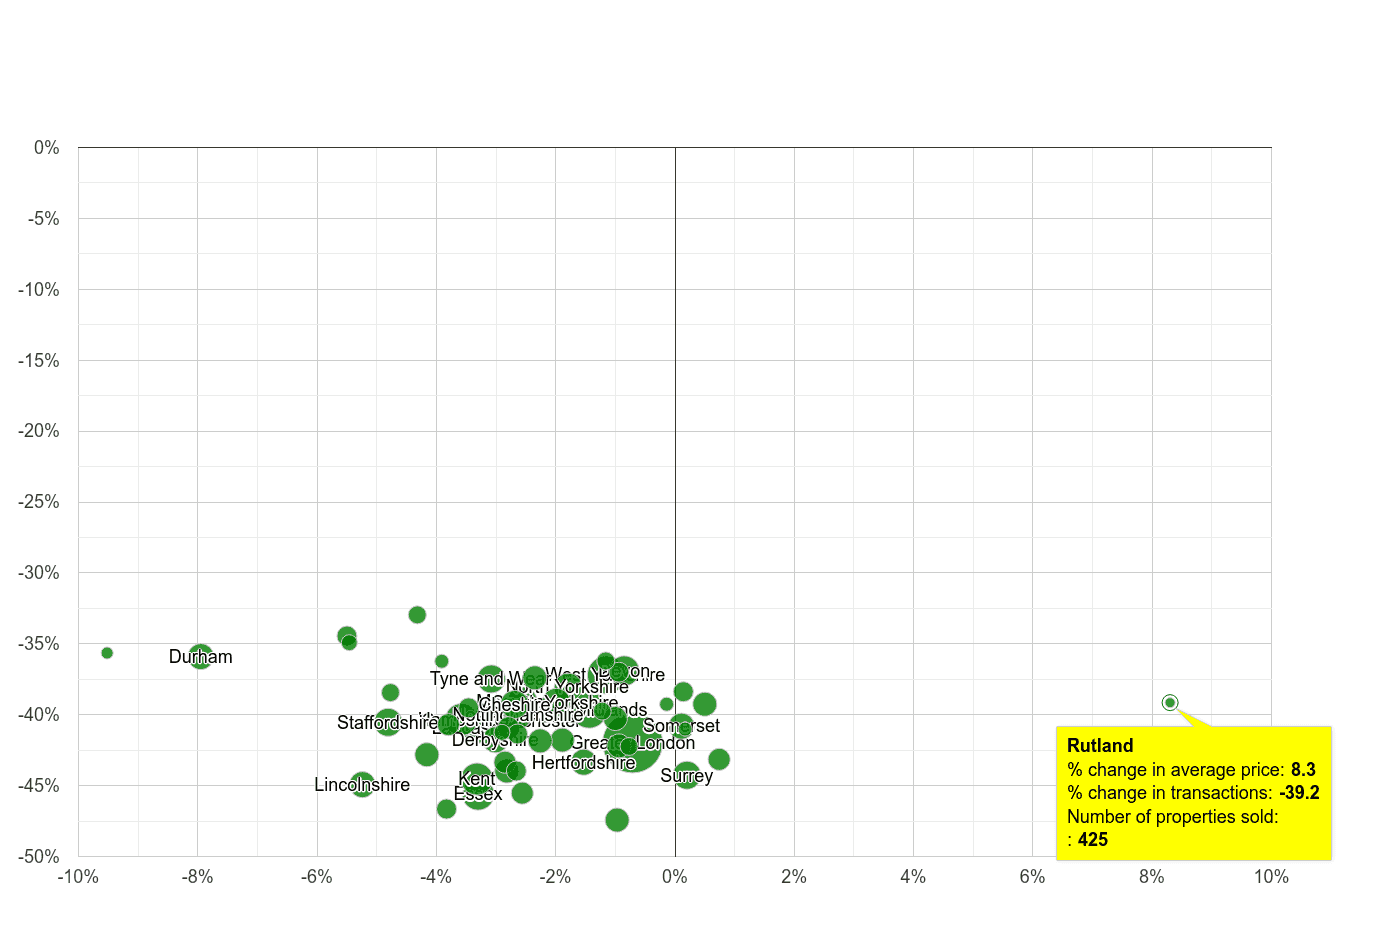 Rutland property price and sales volume change relative to other counties